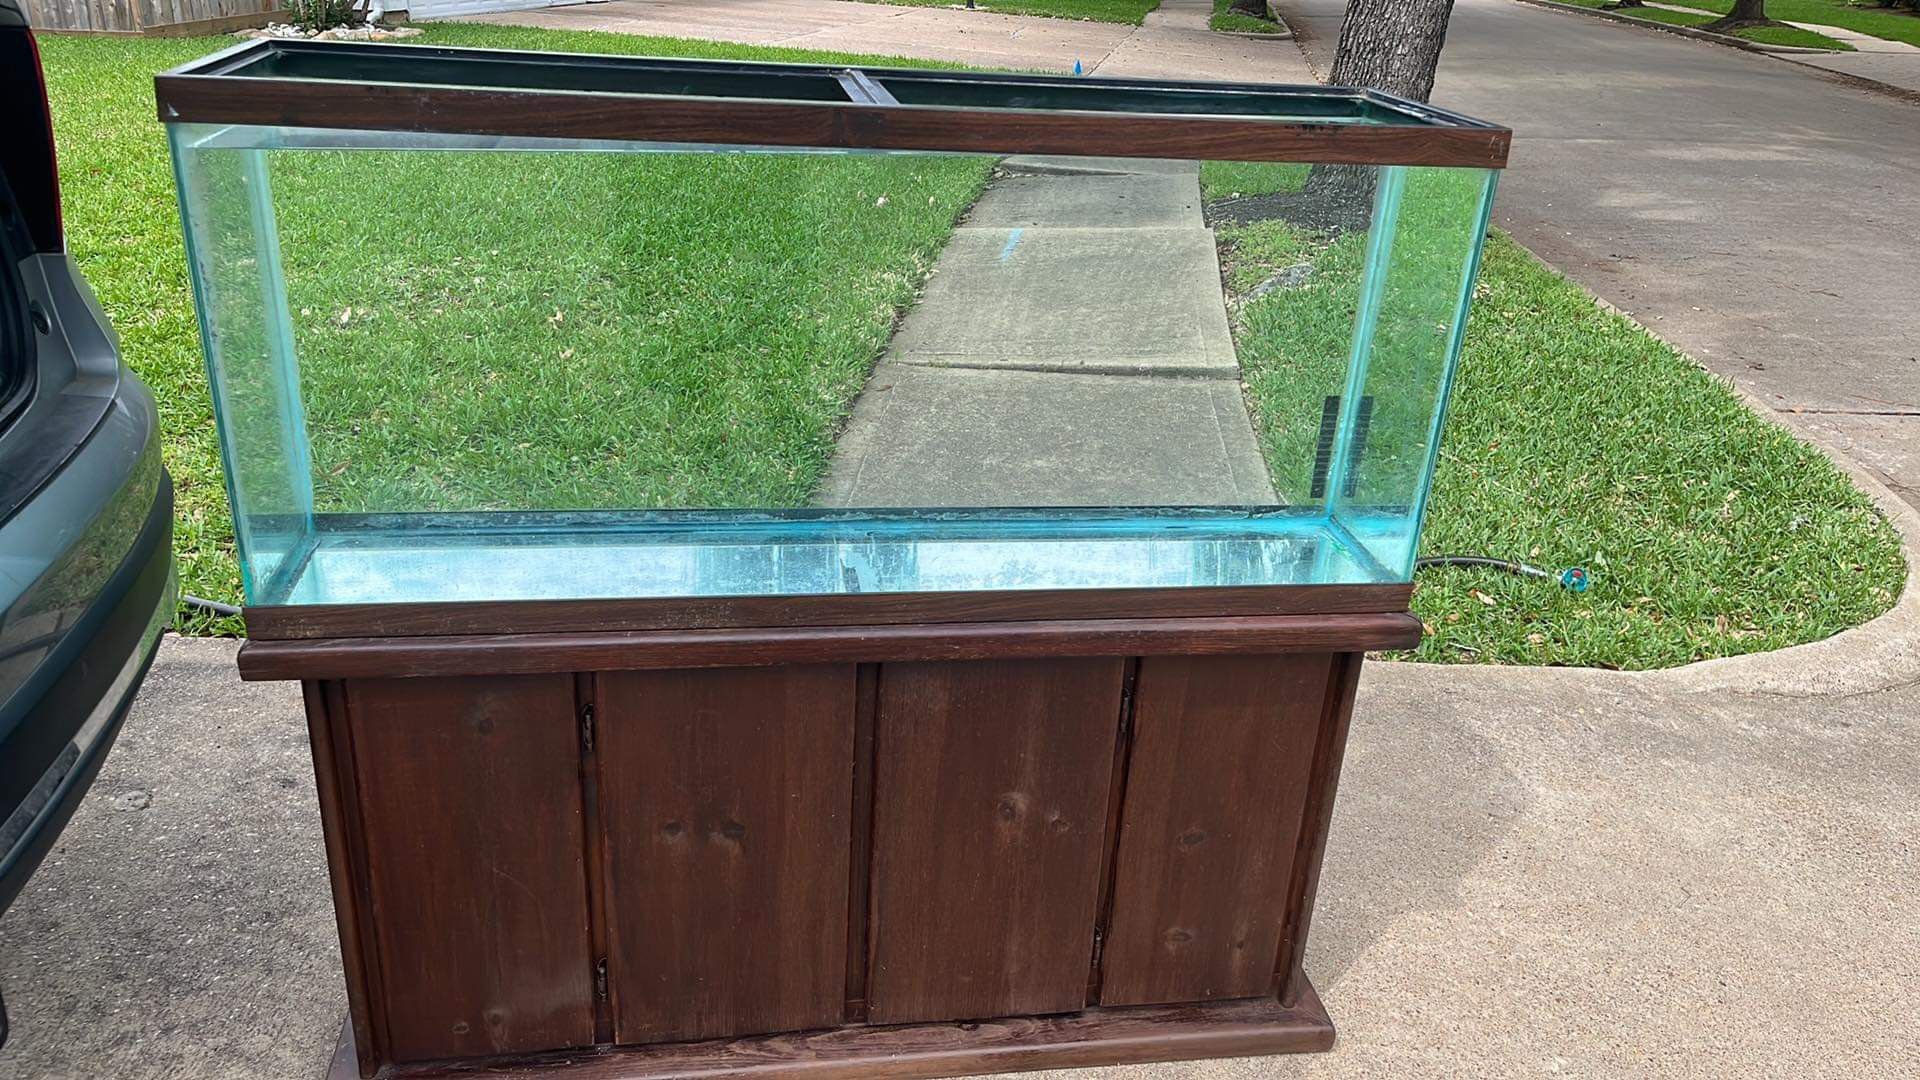 55 Gallon Aquarium With Wooden Stand